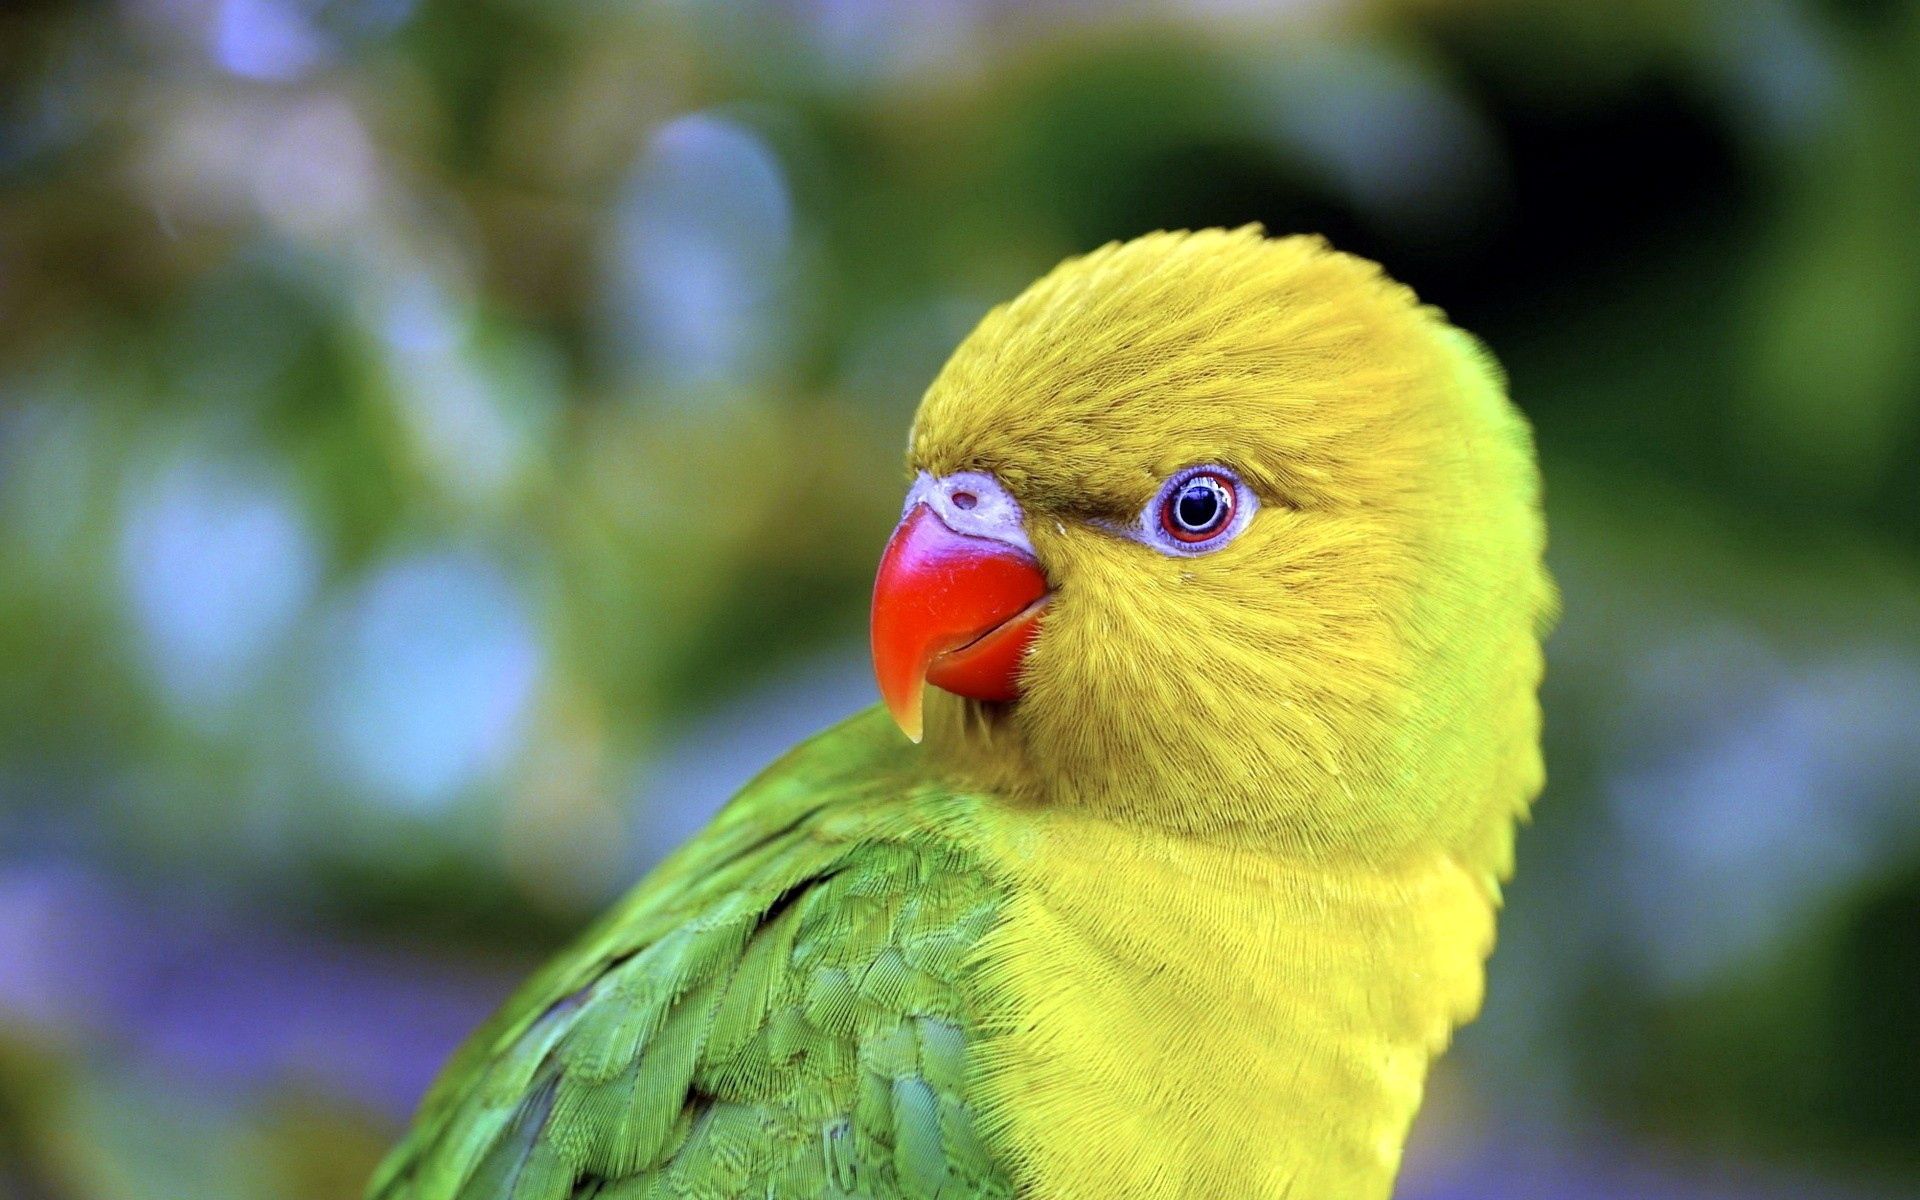 A cute yellow parrot looks out with one eye